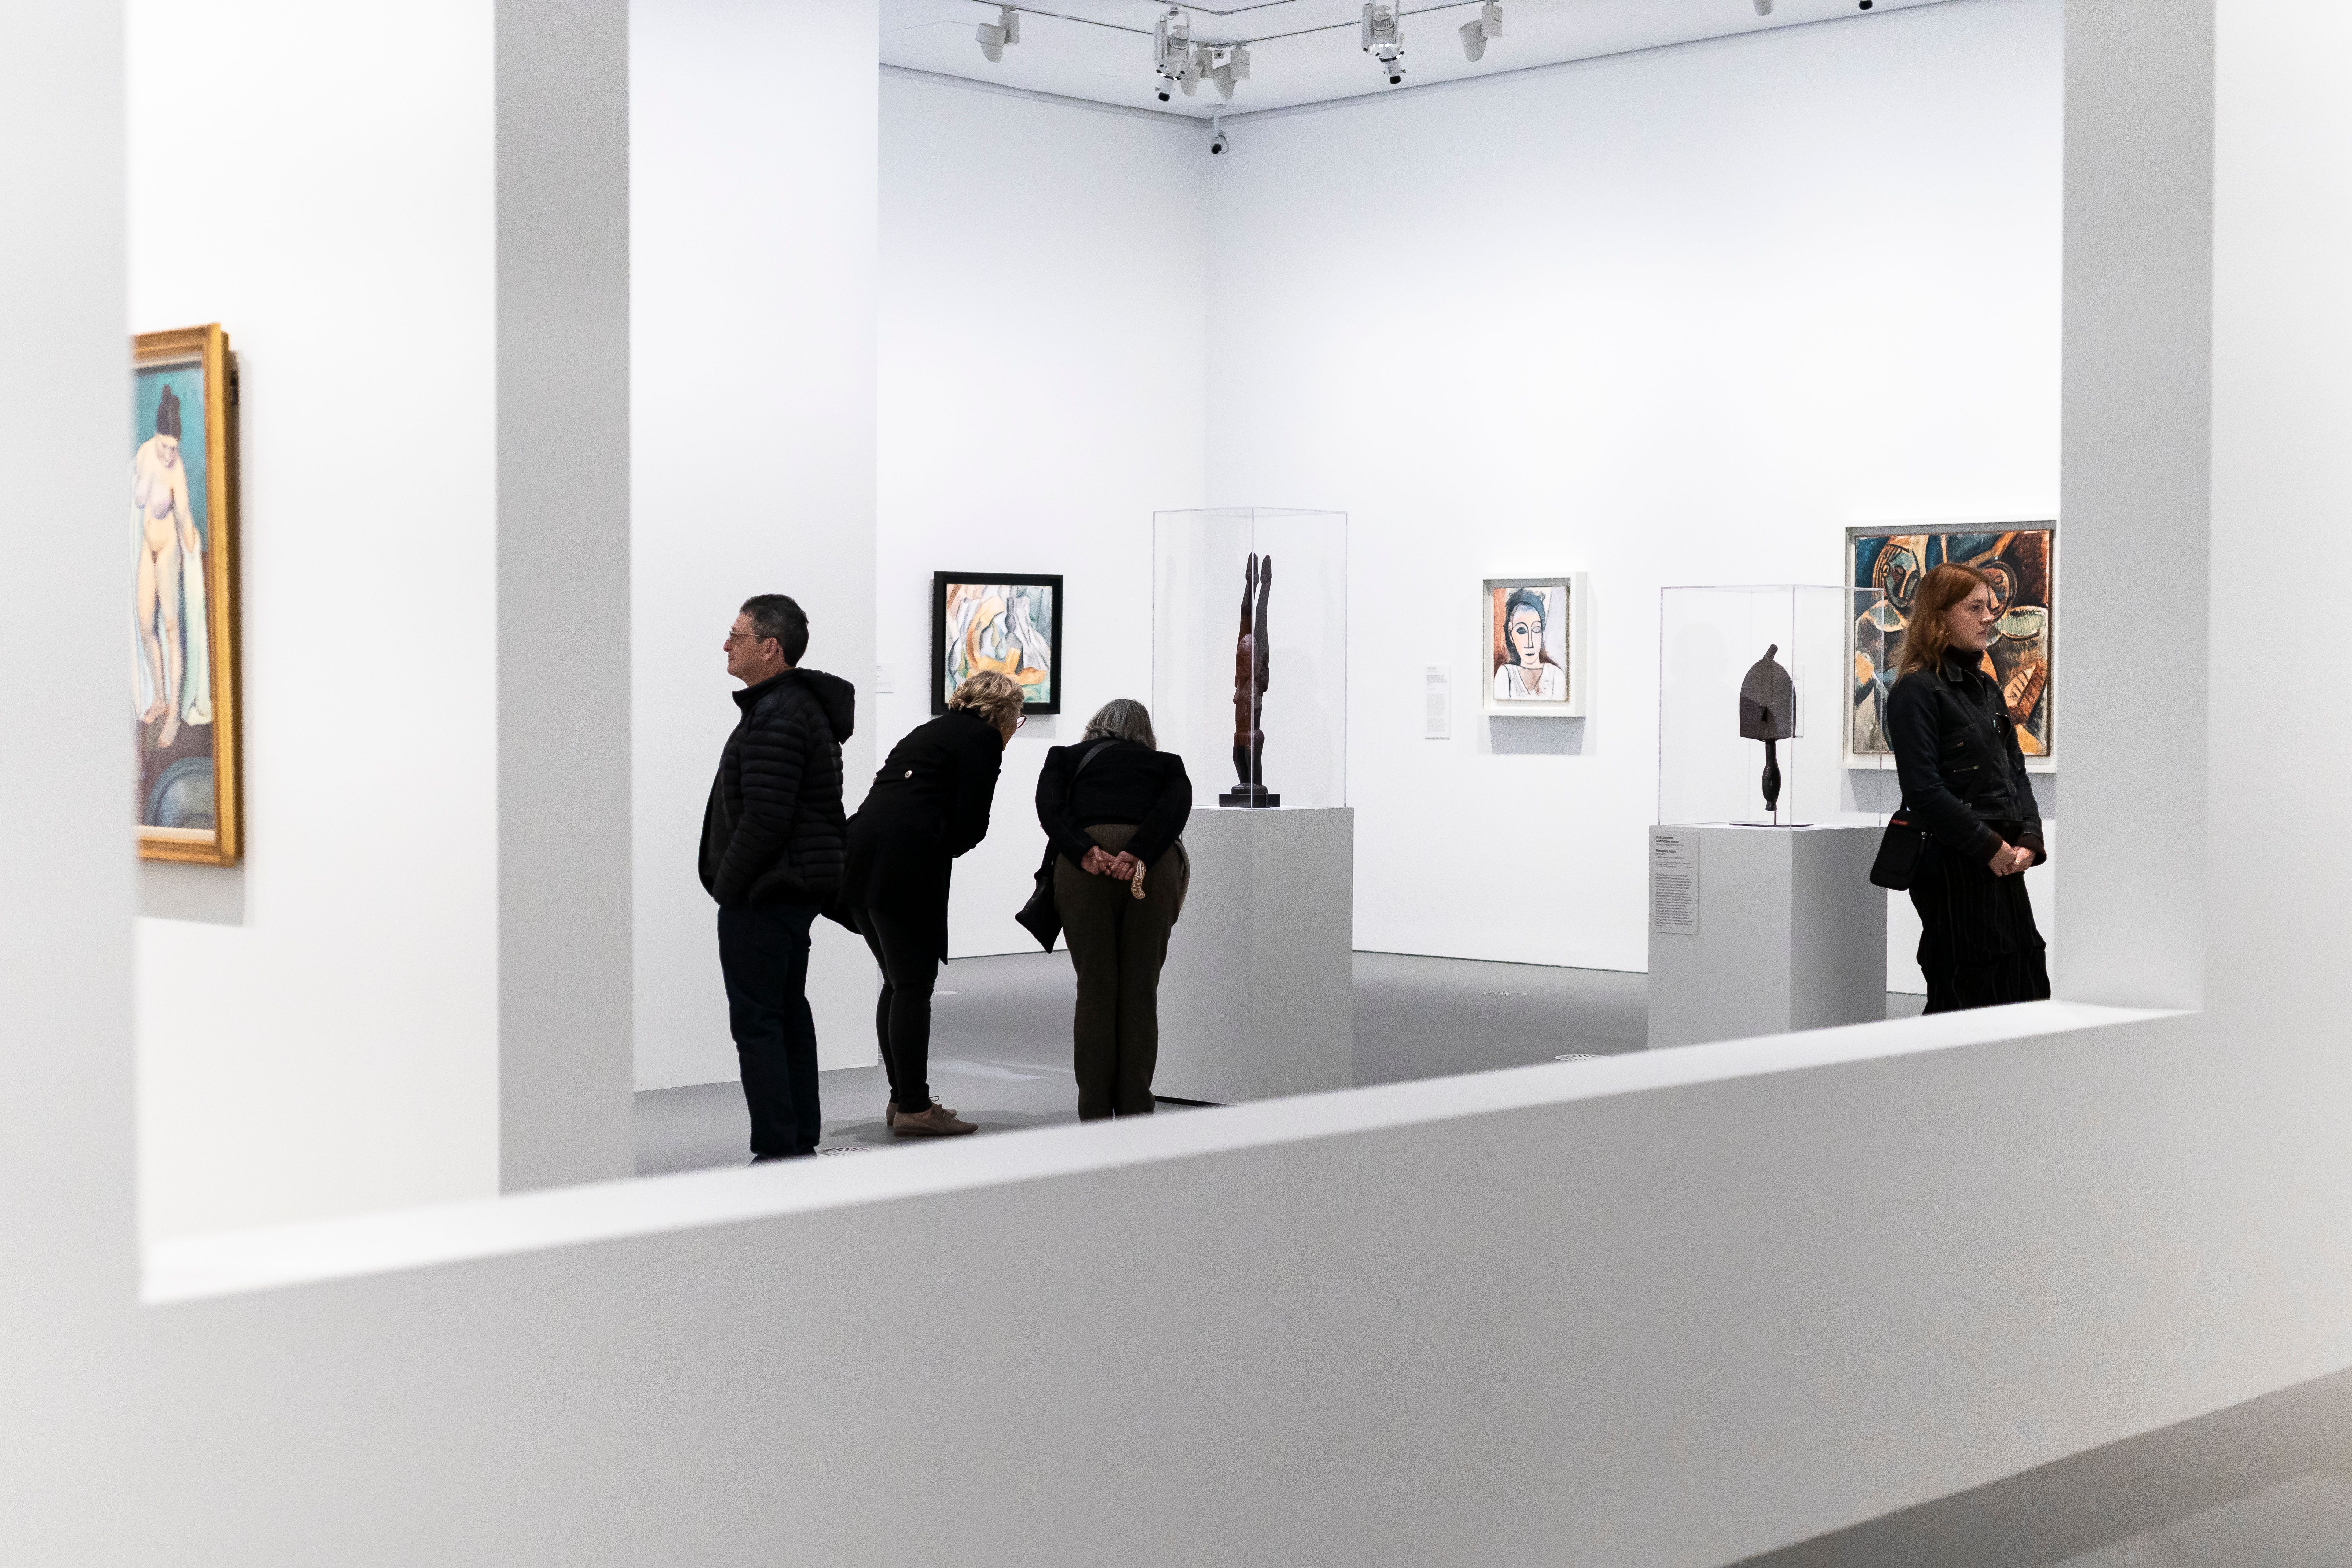 Installation view of <em>The Picasso Century</em> on display from 10 June-9 October 2022 at NGV International, Melbourne. Photo: Jeremy Kees